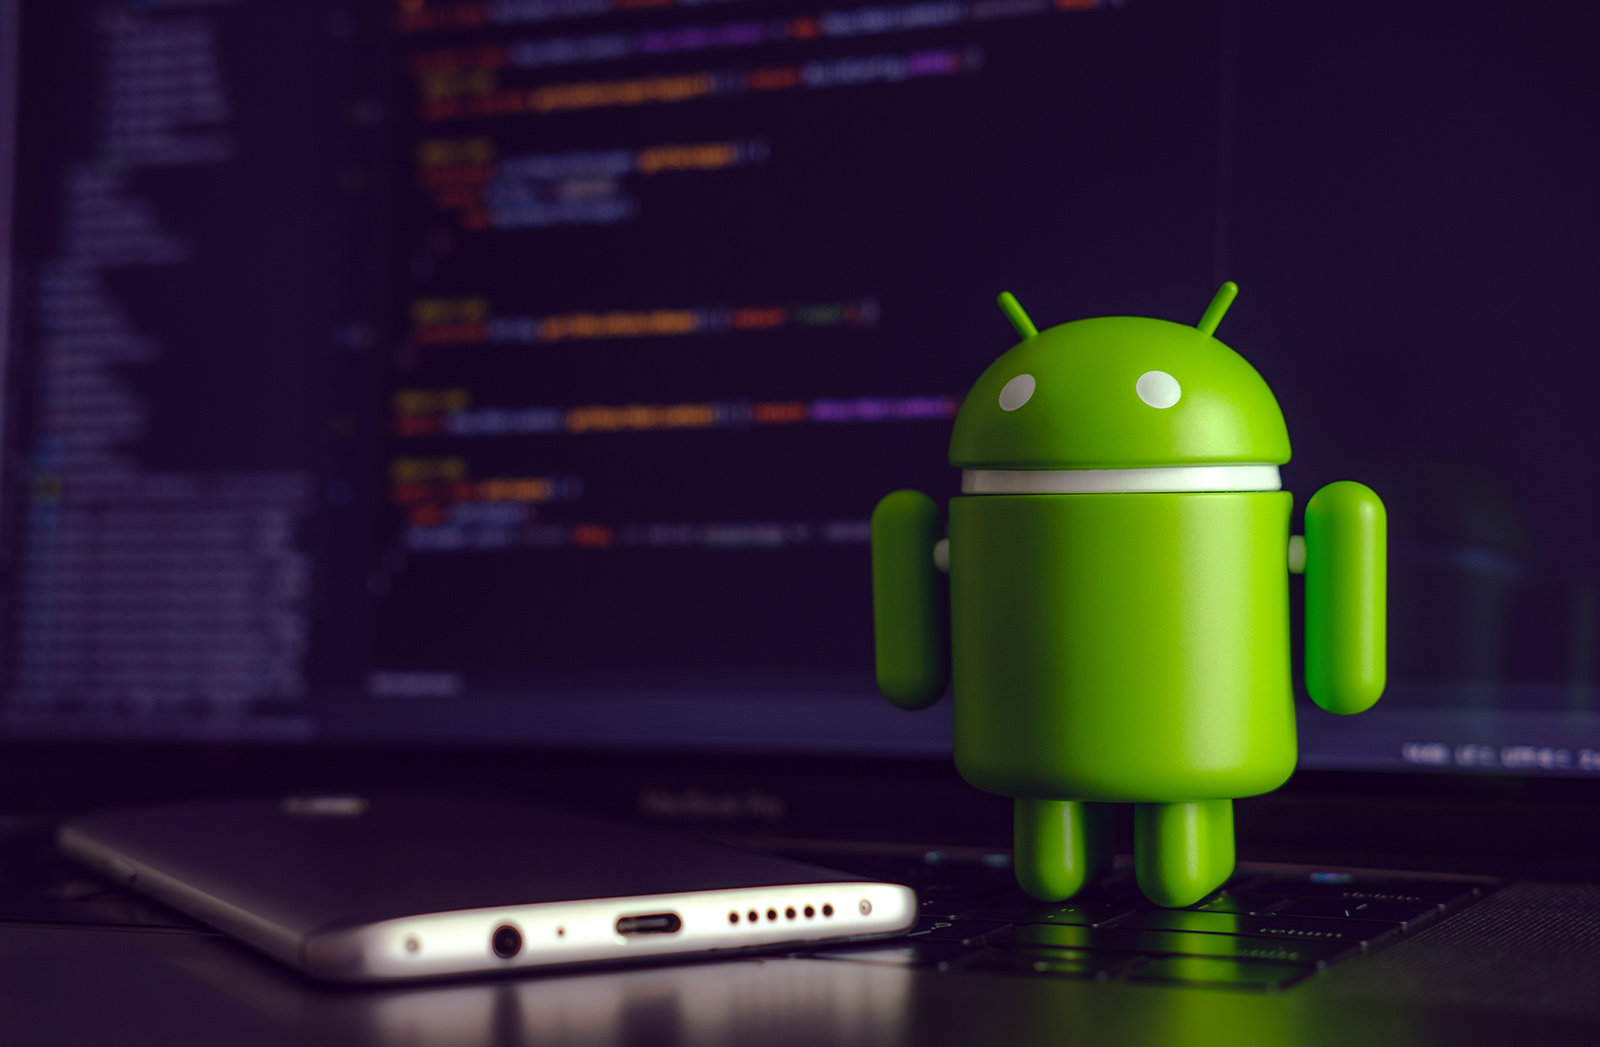 Undeletable' Malware Shows Up in Yet Another Android Device